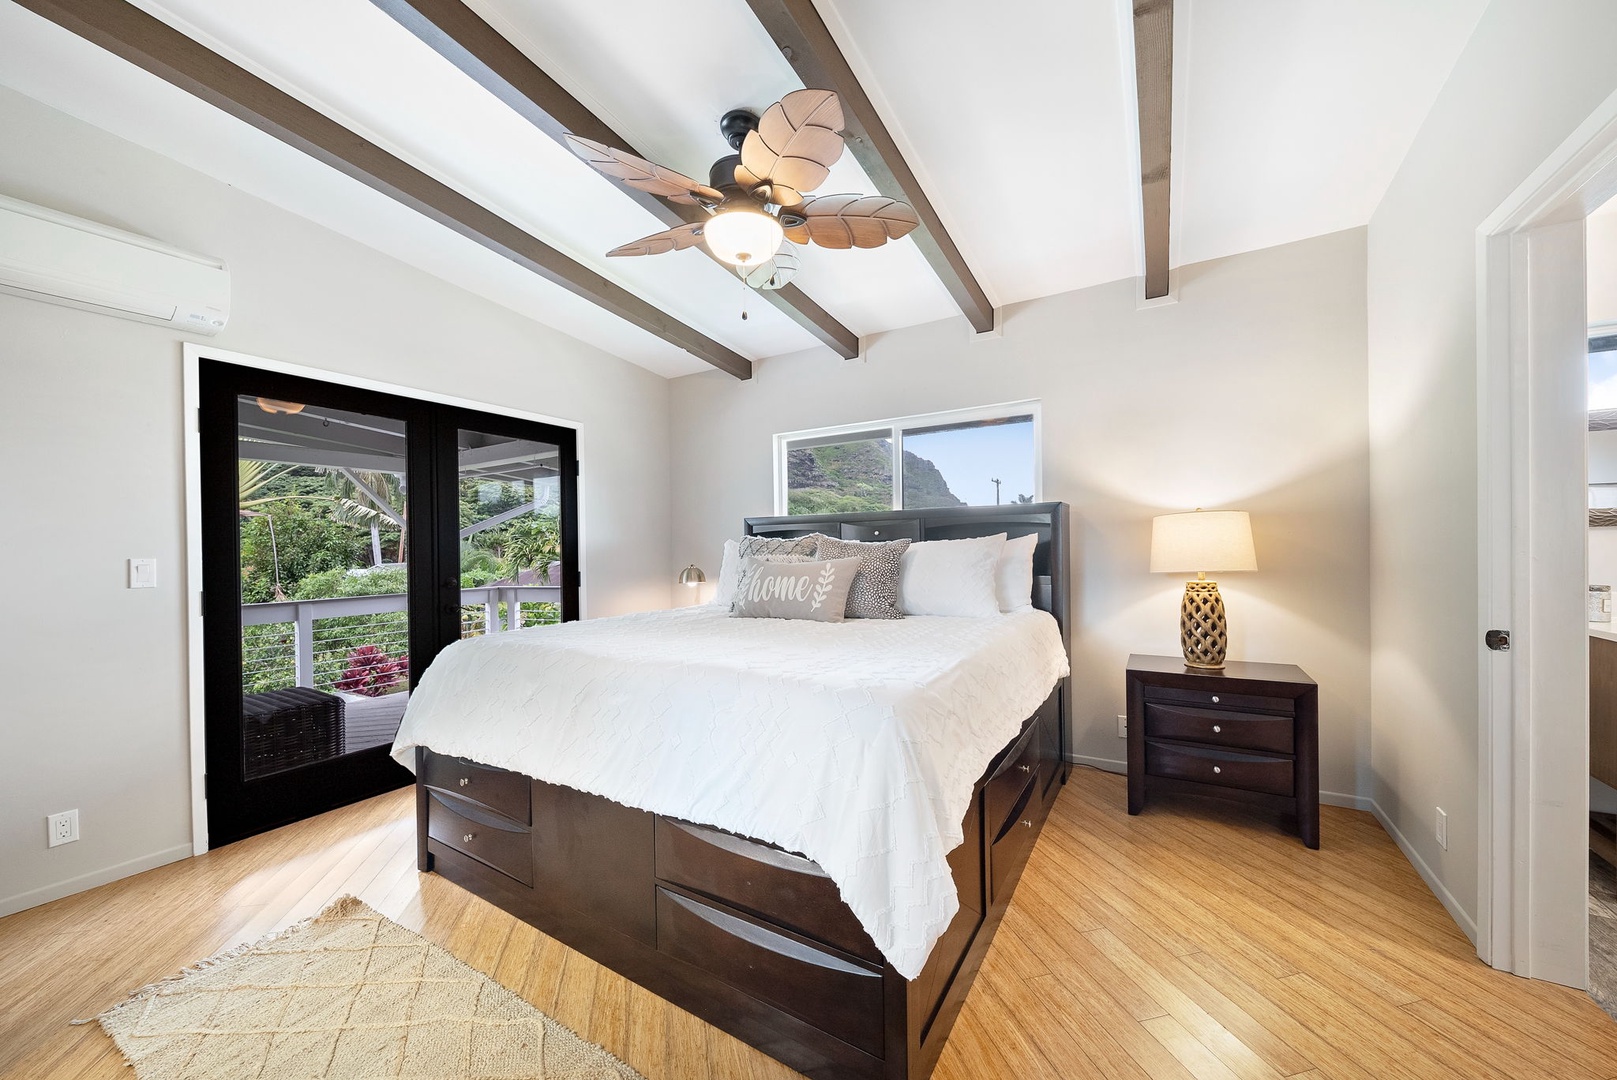 Kaaawa Vacation Rentals, Kualoa Ohia - Primary bedroom with king bed, ceiling fan and split A/C